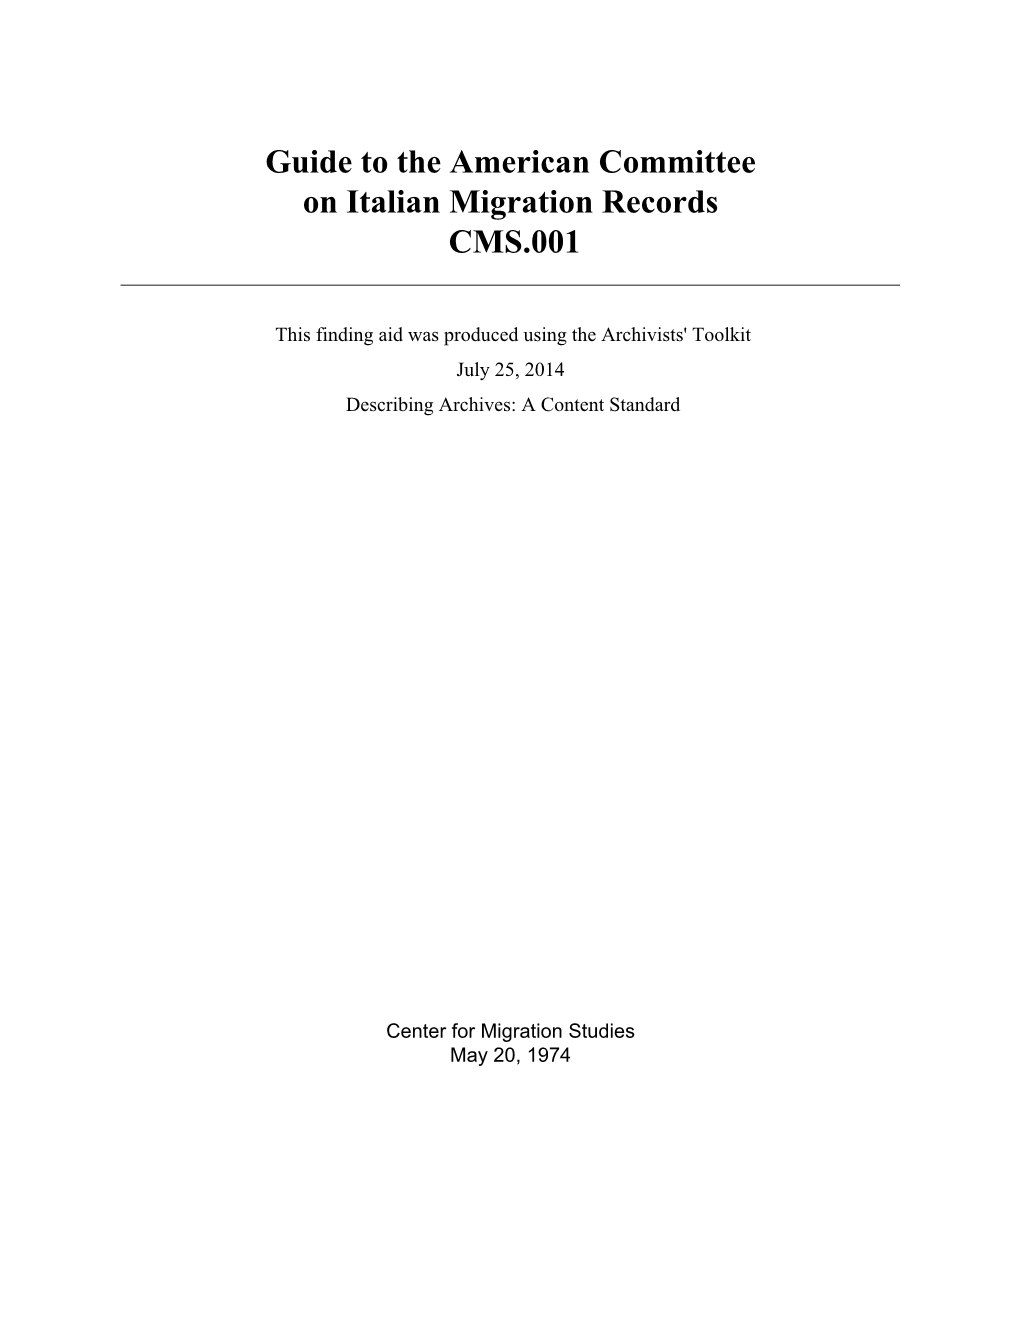 Guide to the American Committee on Italian Migration Records CMS.001